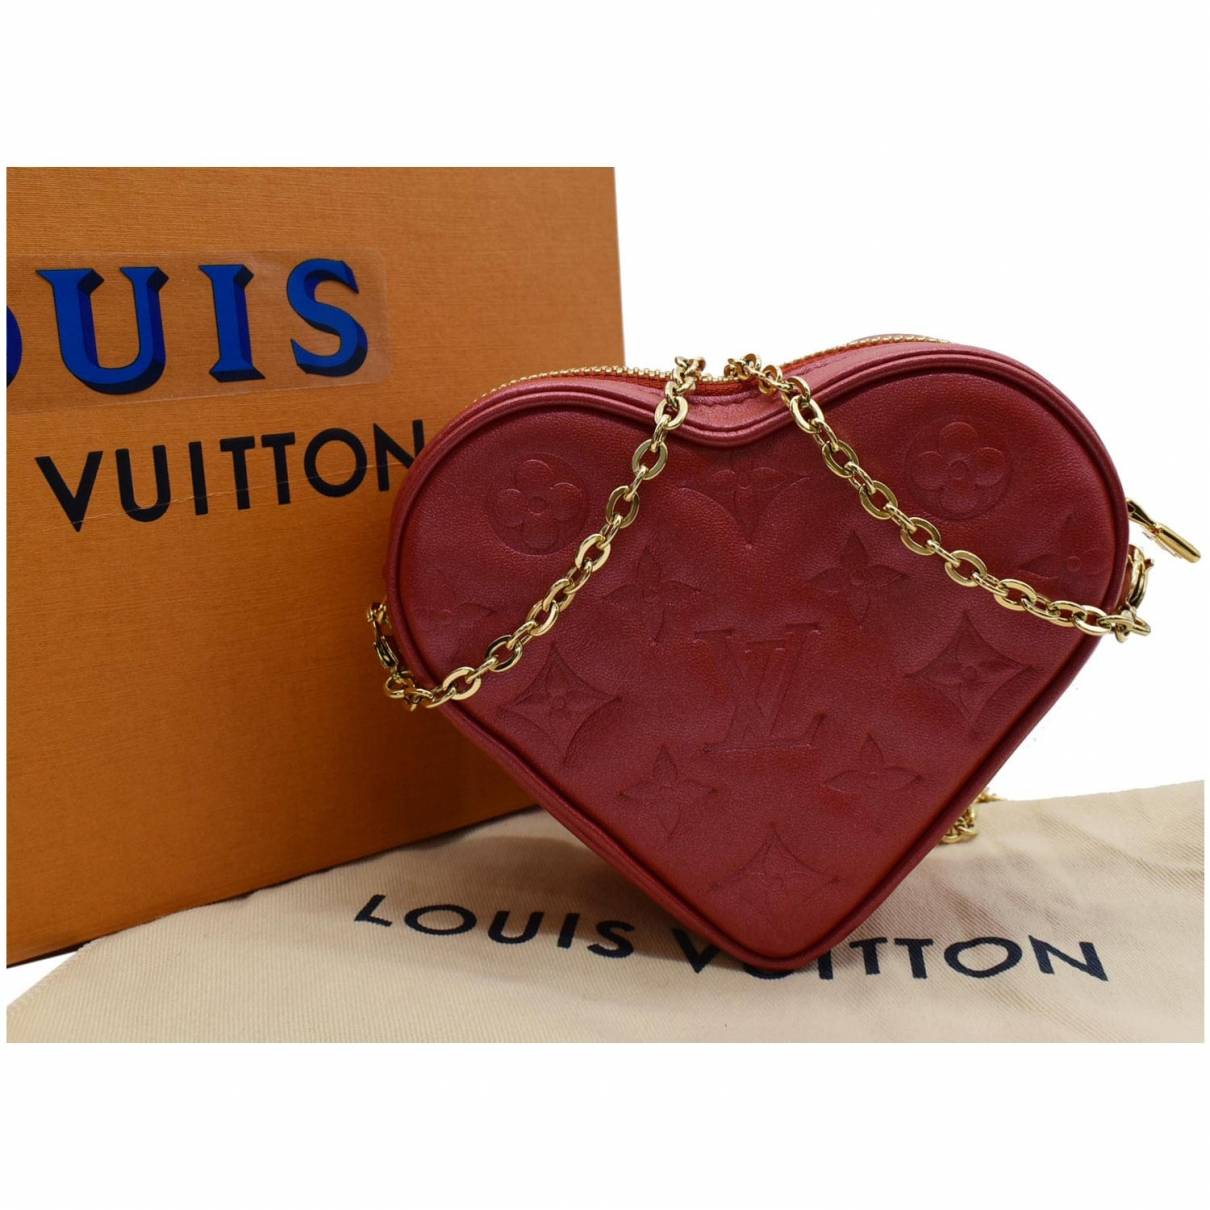 Chain bag leather crossbody bag Louis Vuitton Red in Leather